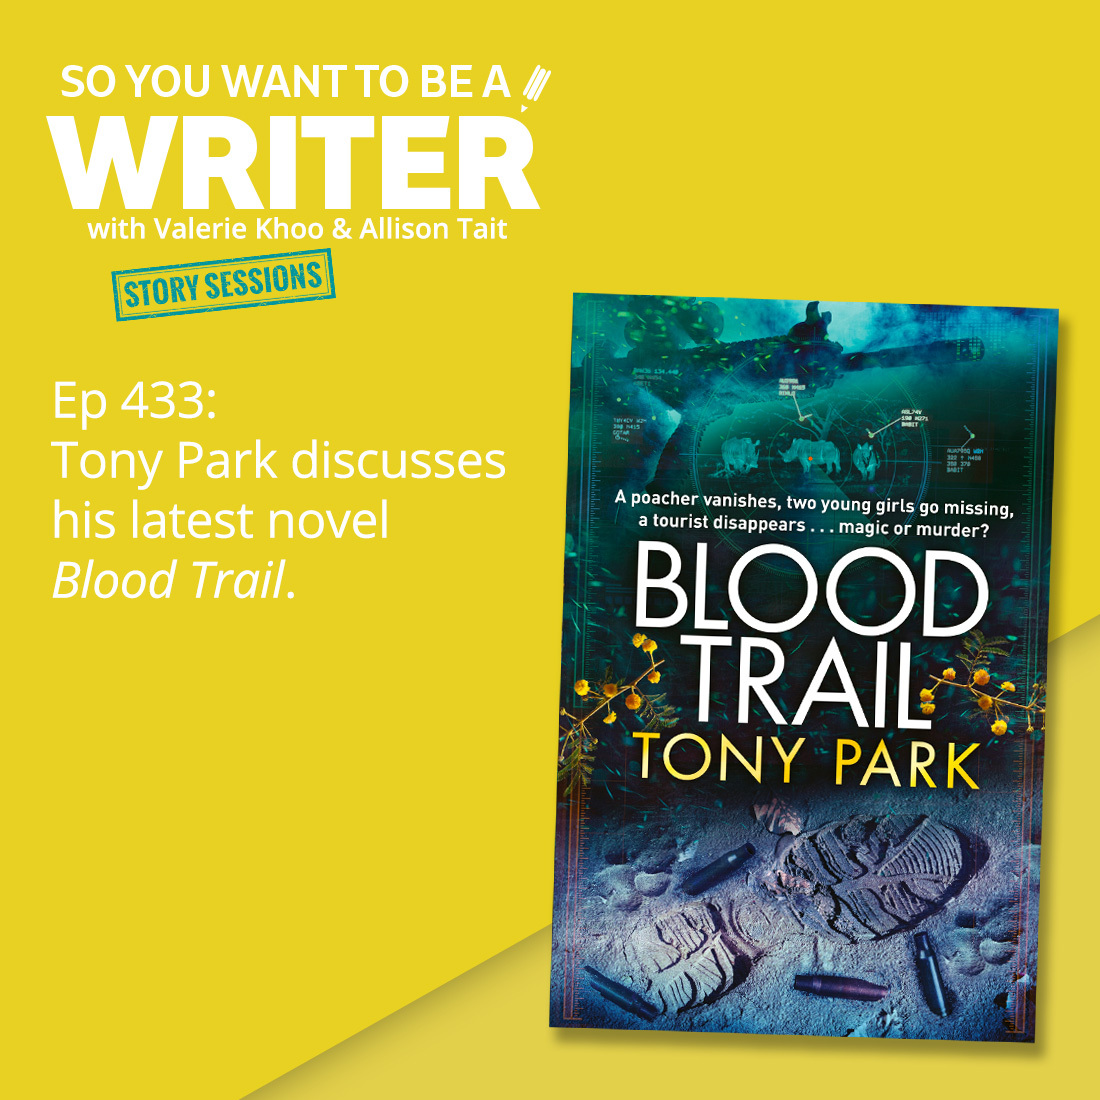 WRITER 433: Tony Park discusses his latest novel 'Blood Trail' [Story Sessions series]